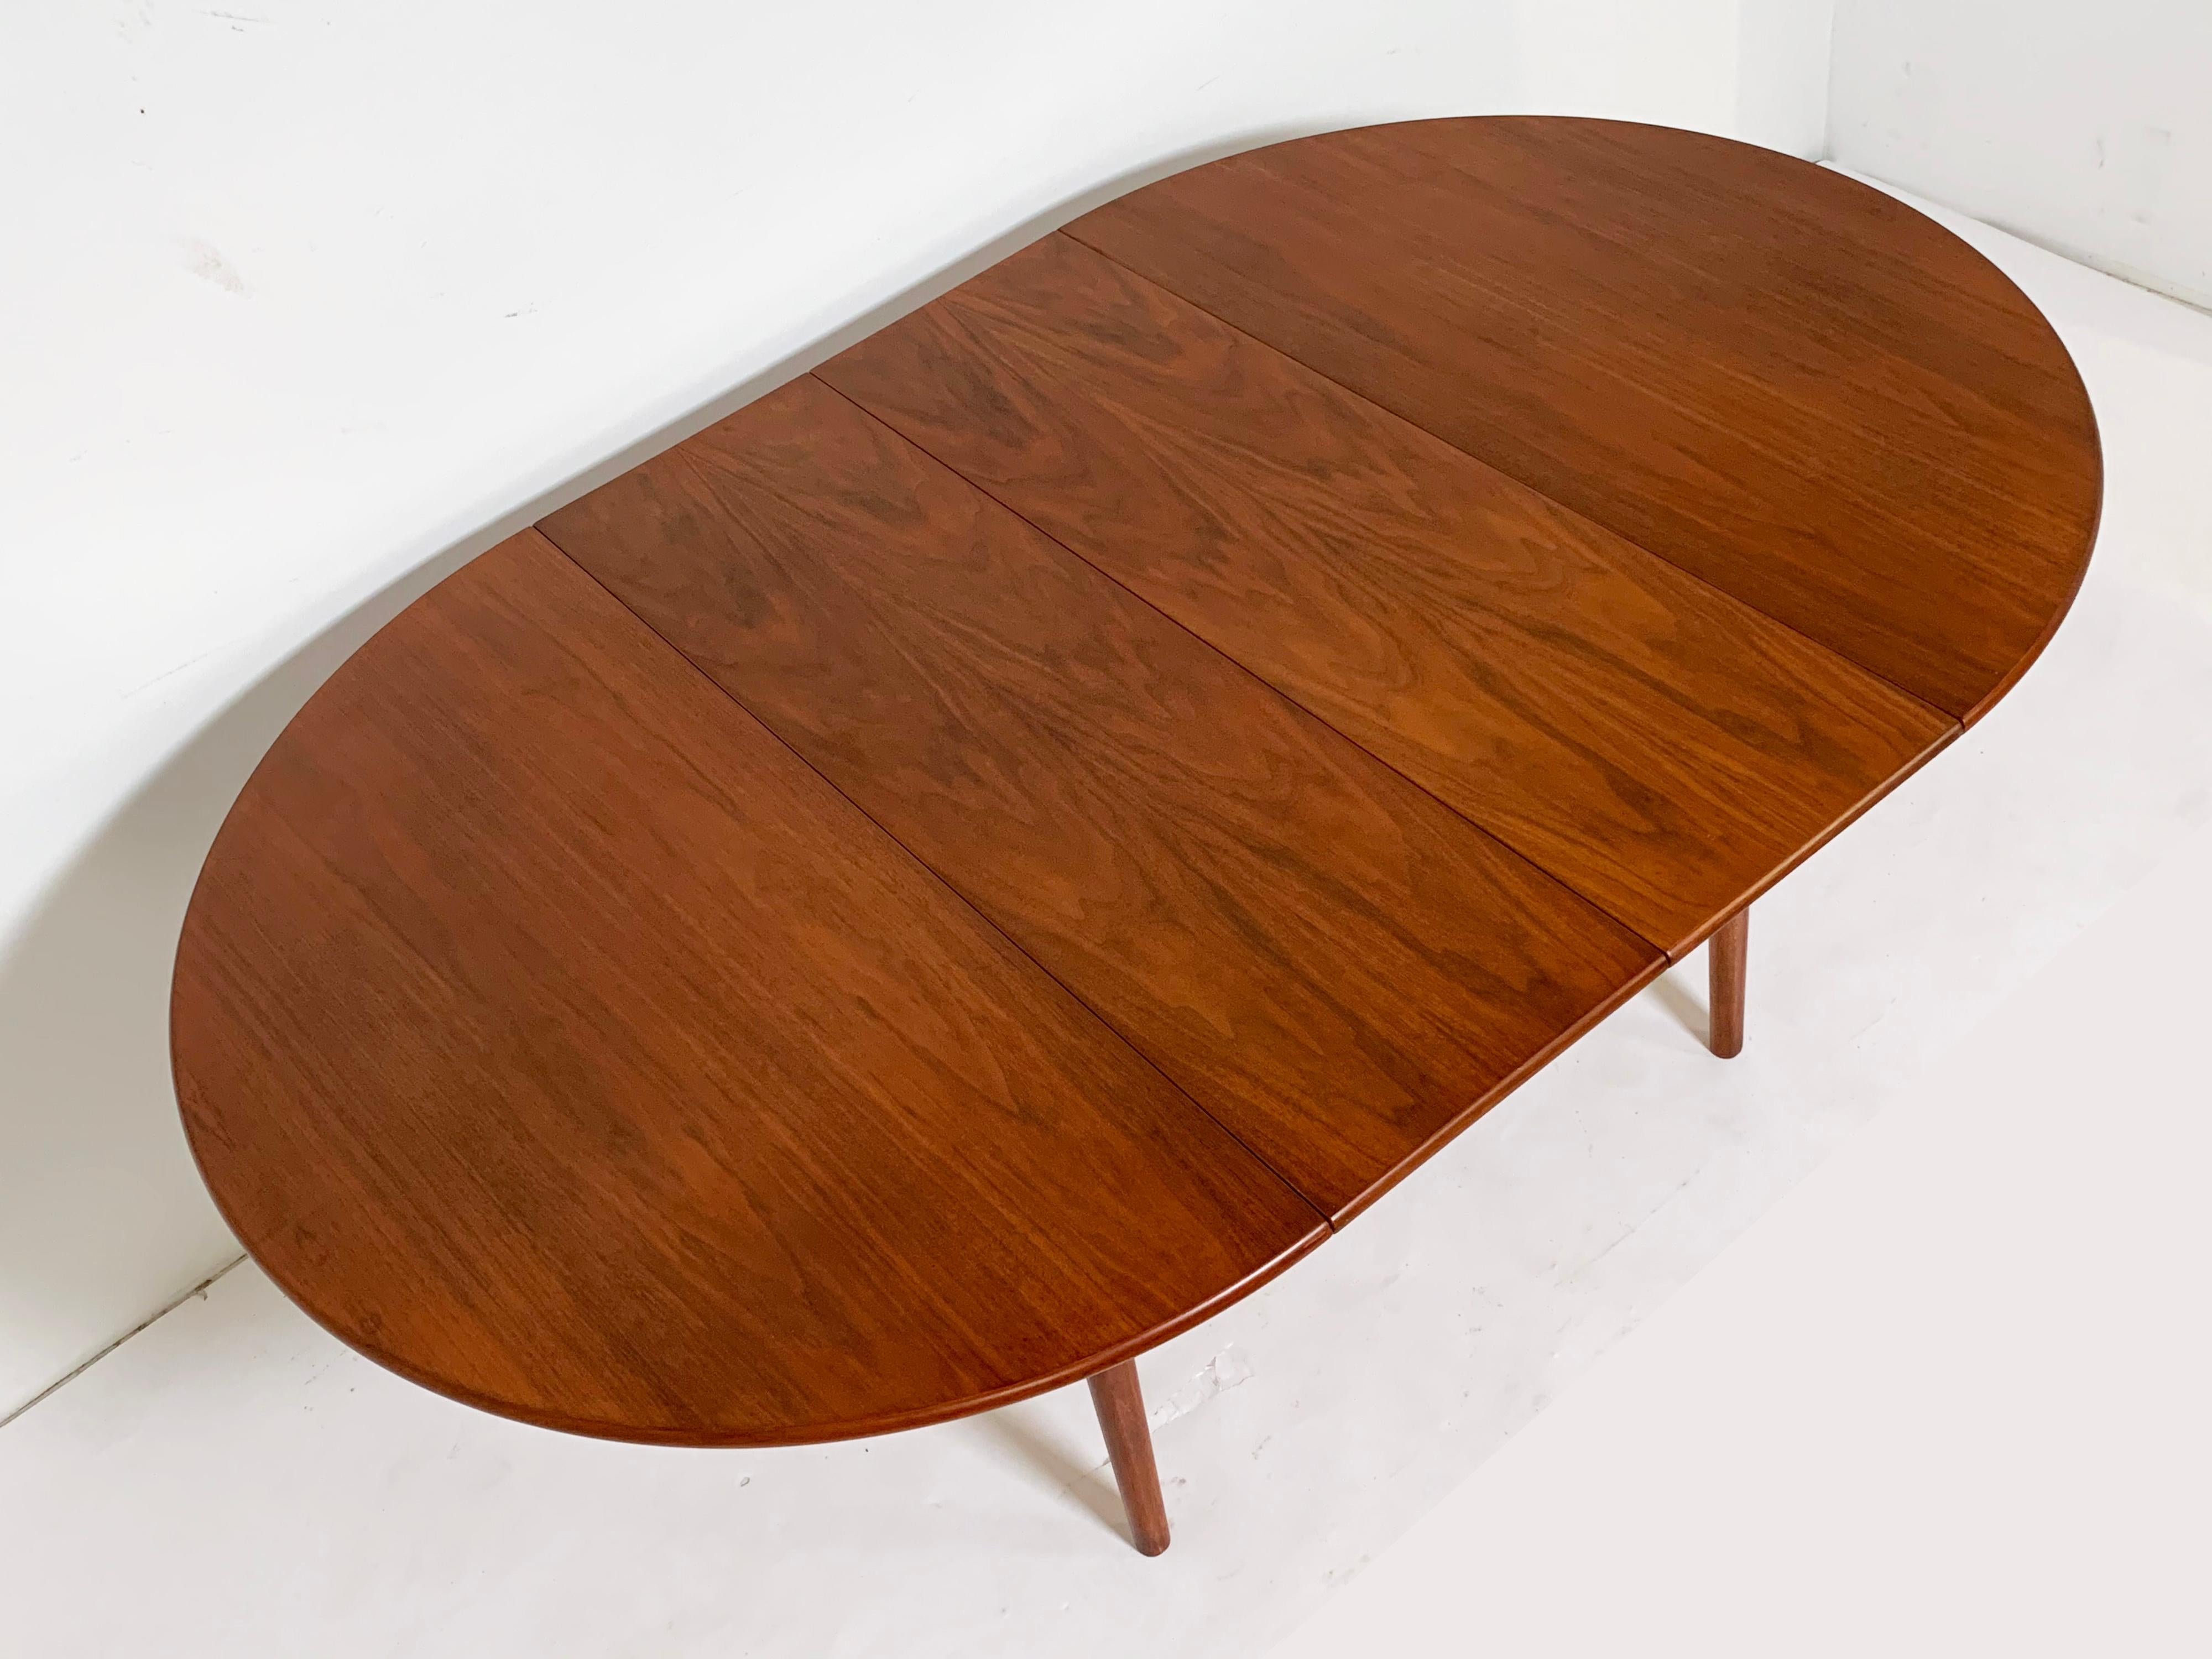 European Round Danish Teak Dining Table with Two Leaves, circa 1960s